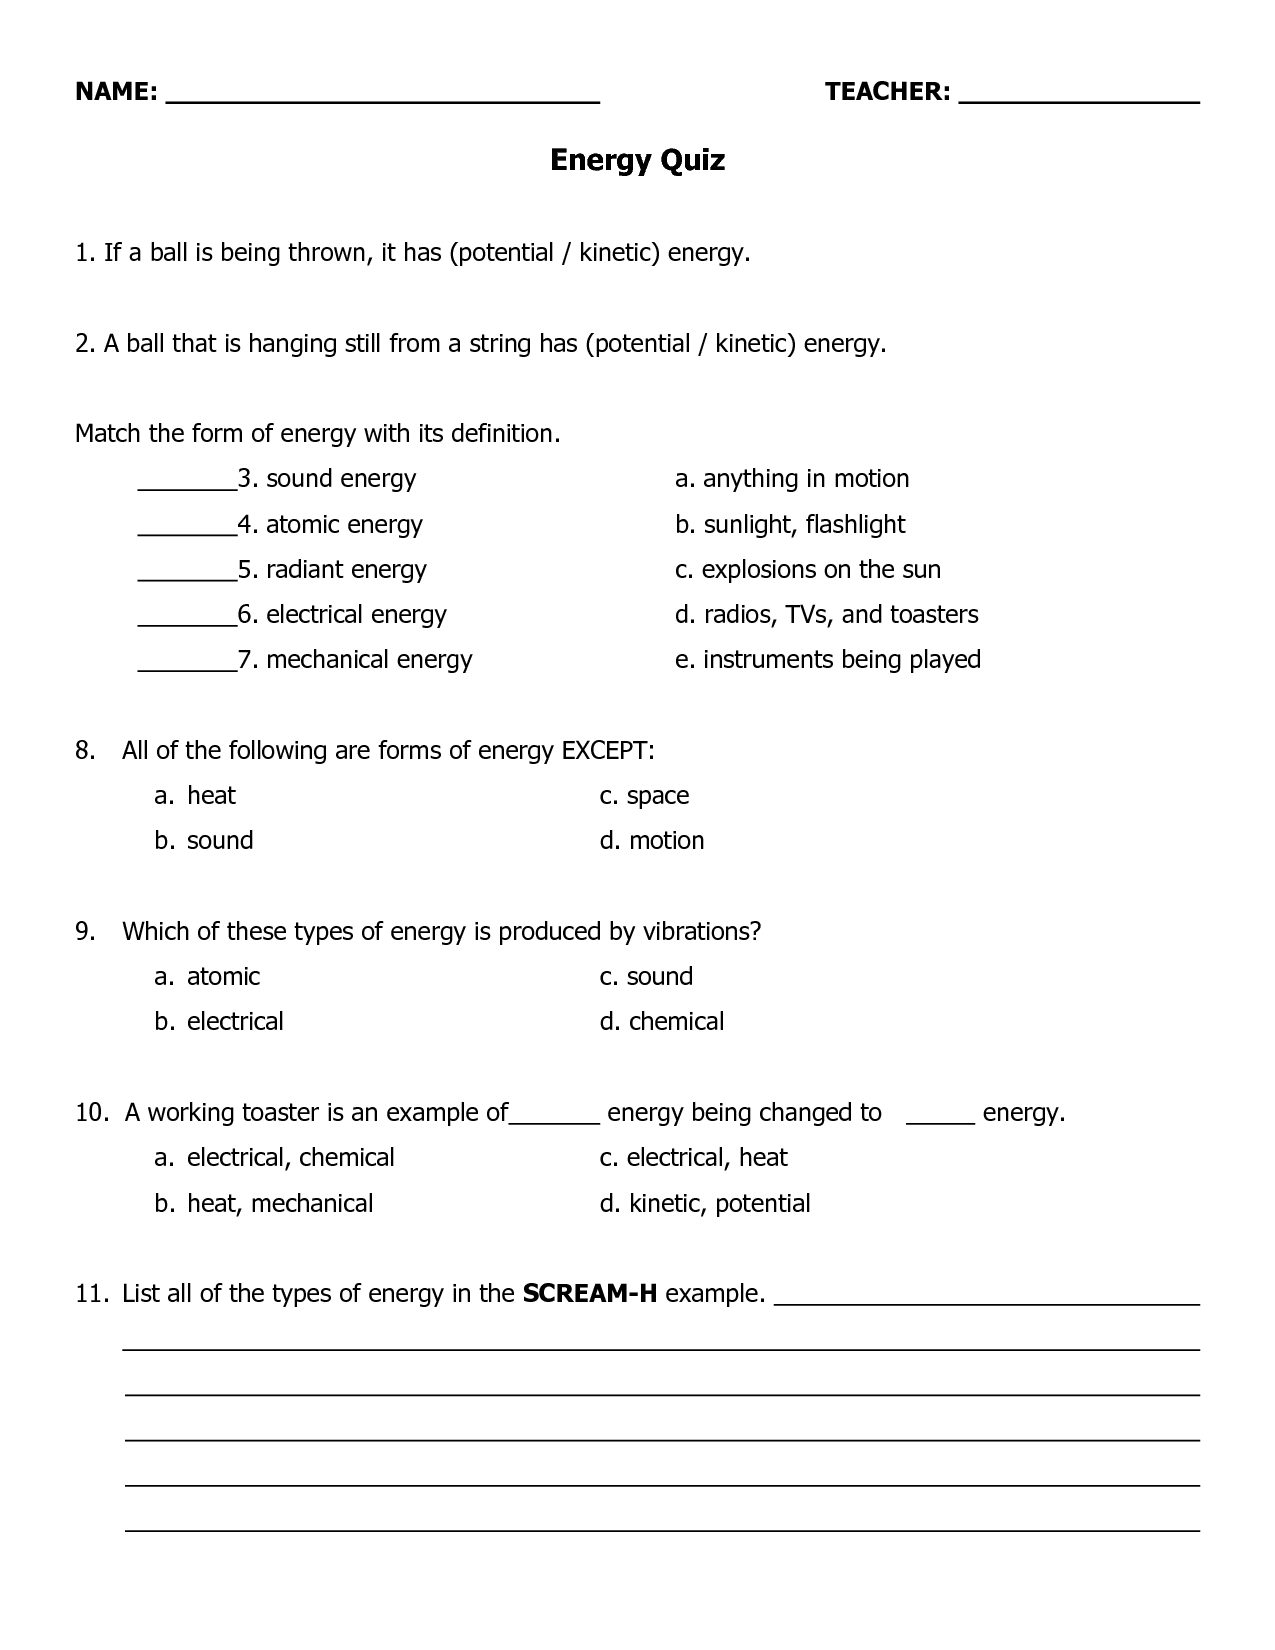 14 Best Images Of Types Of Energy Worksheet Elementary Energy Sources 